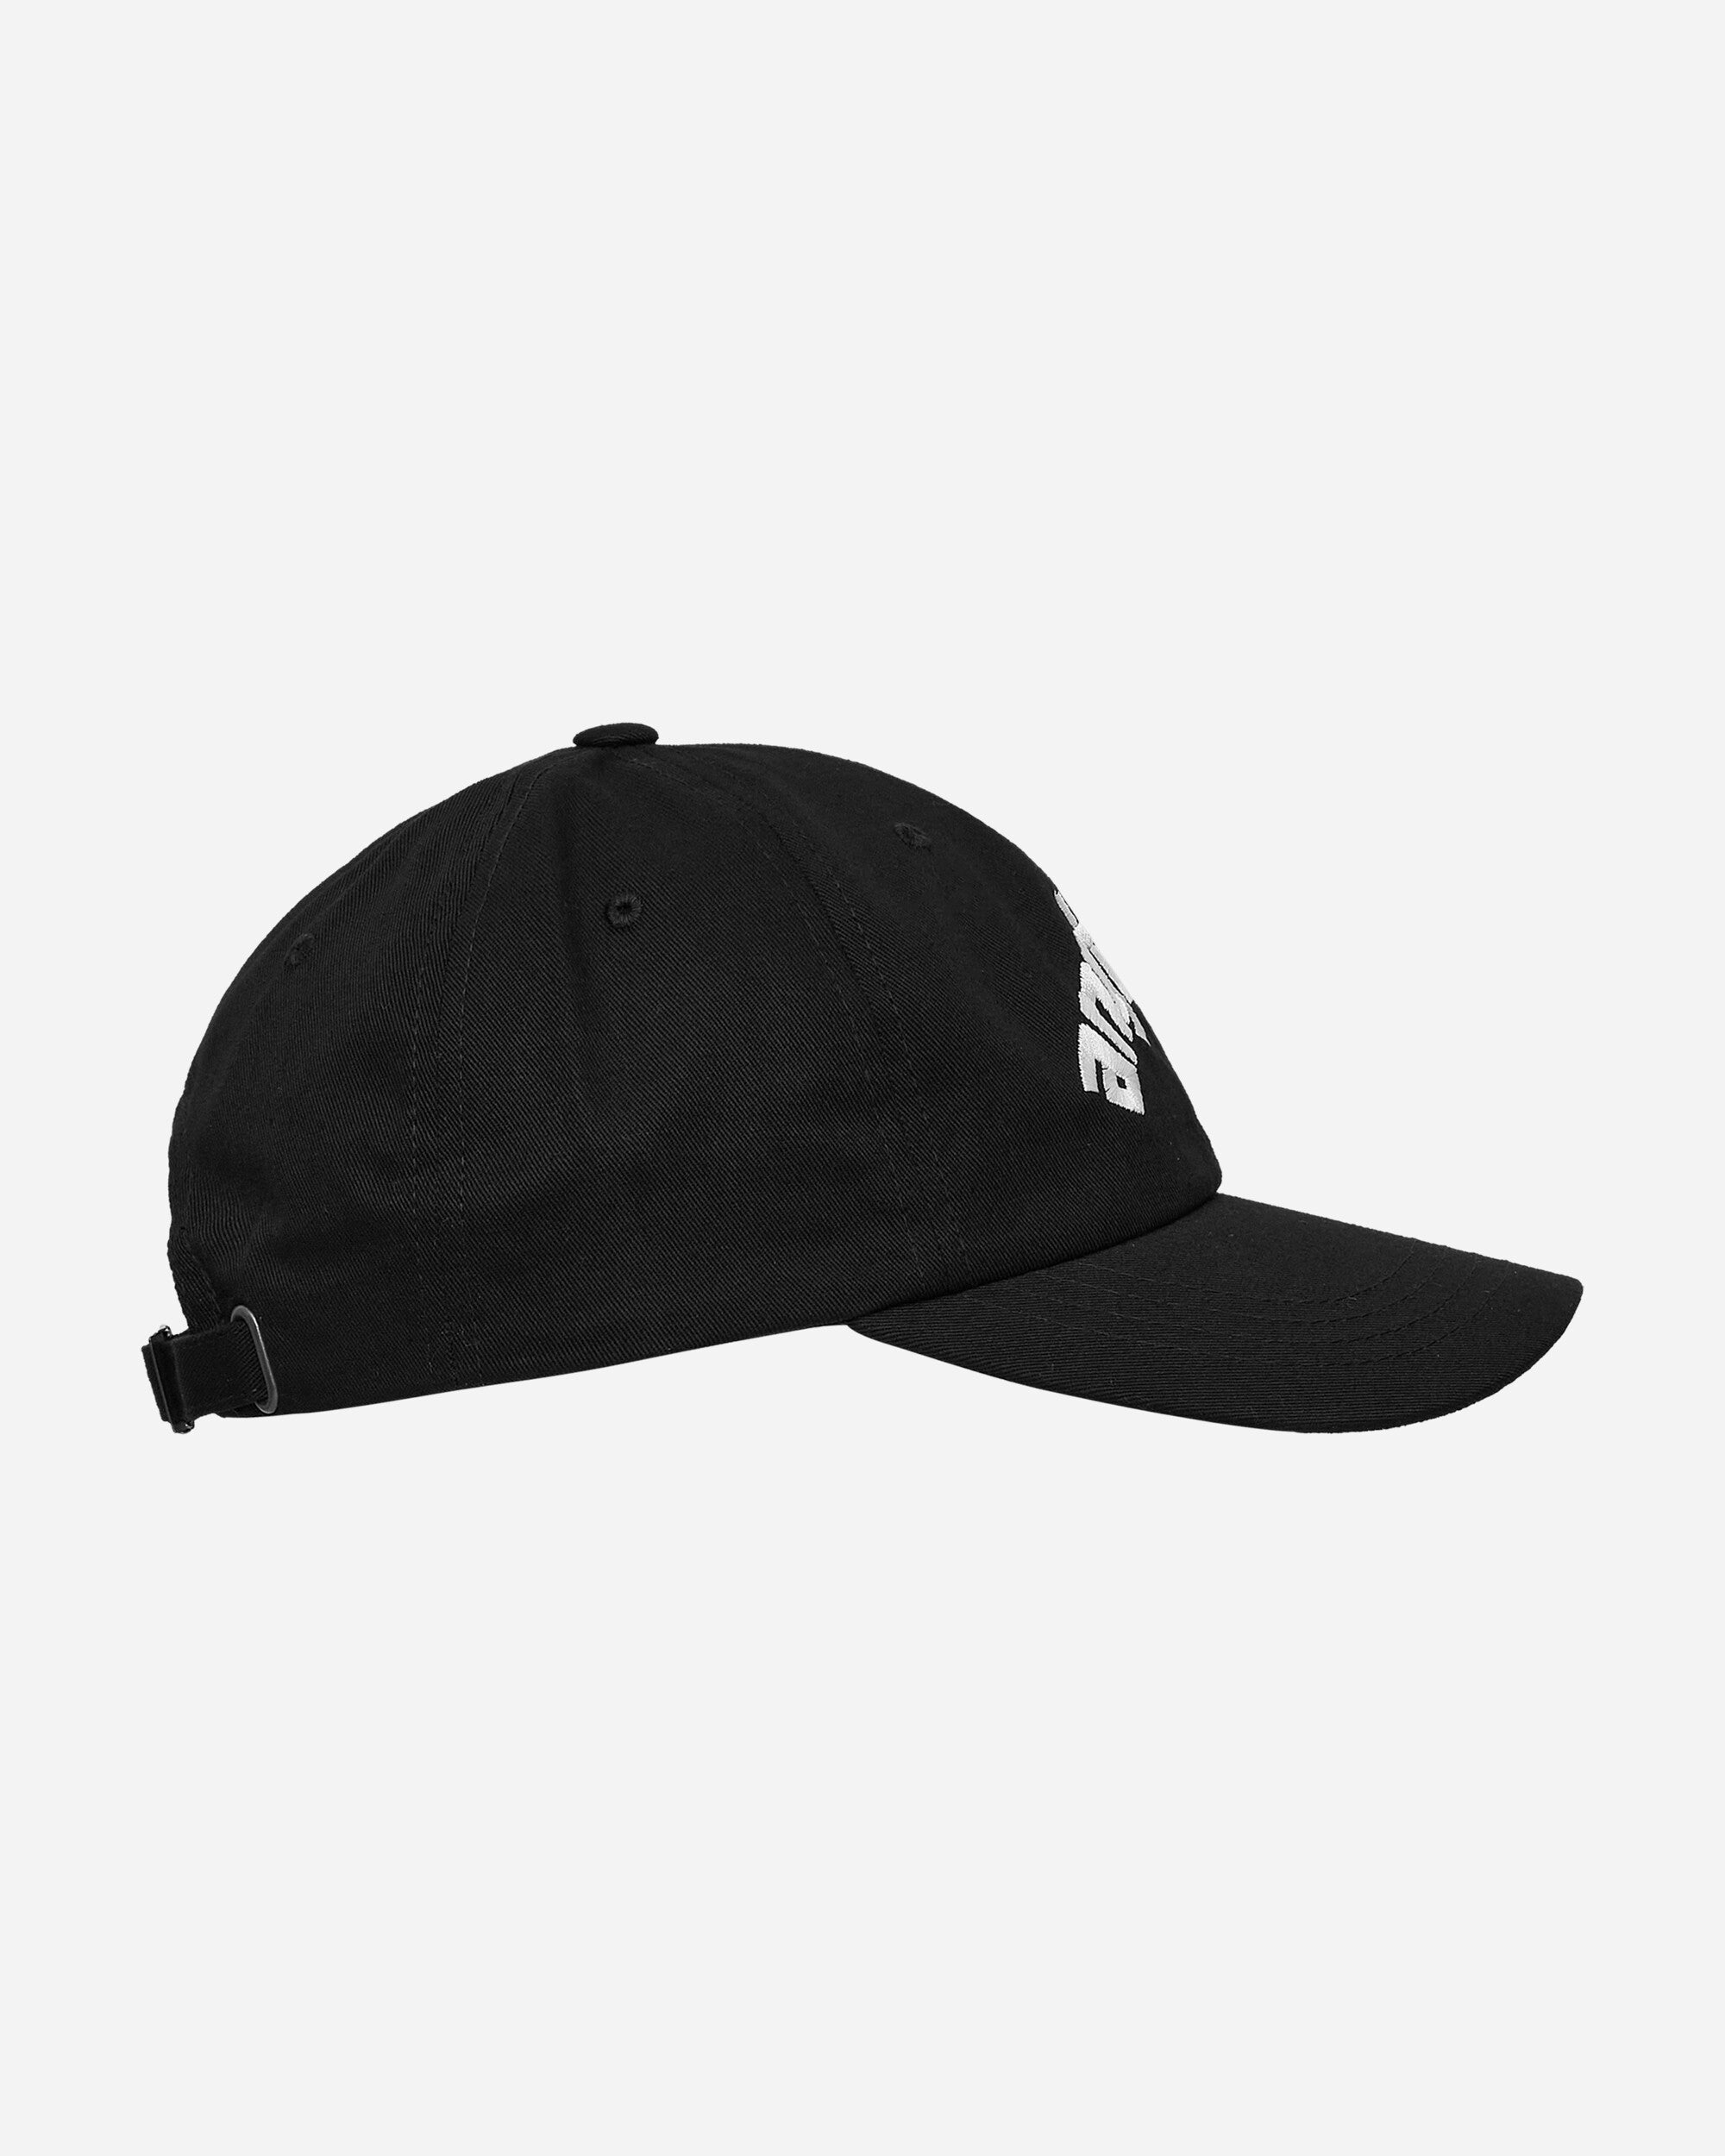 aNYthing Curved Logo Dad Hat Black Hats Caps ANY-102 BK